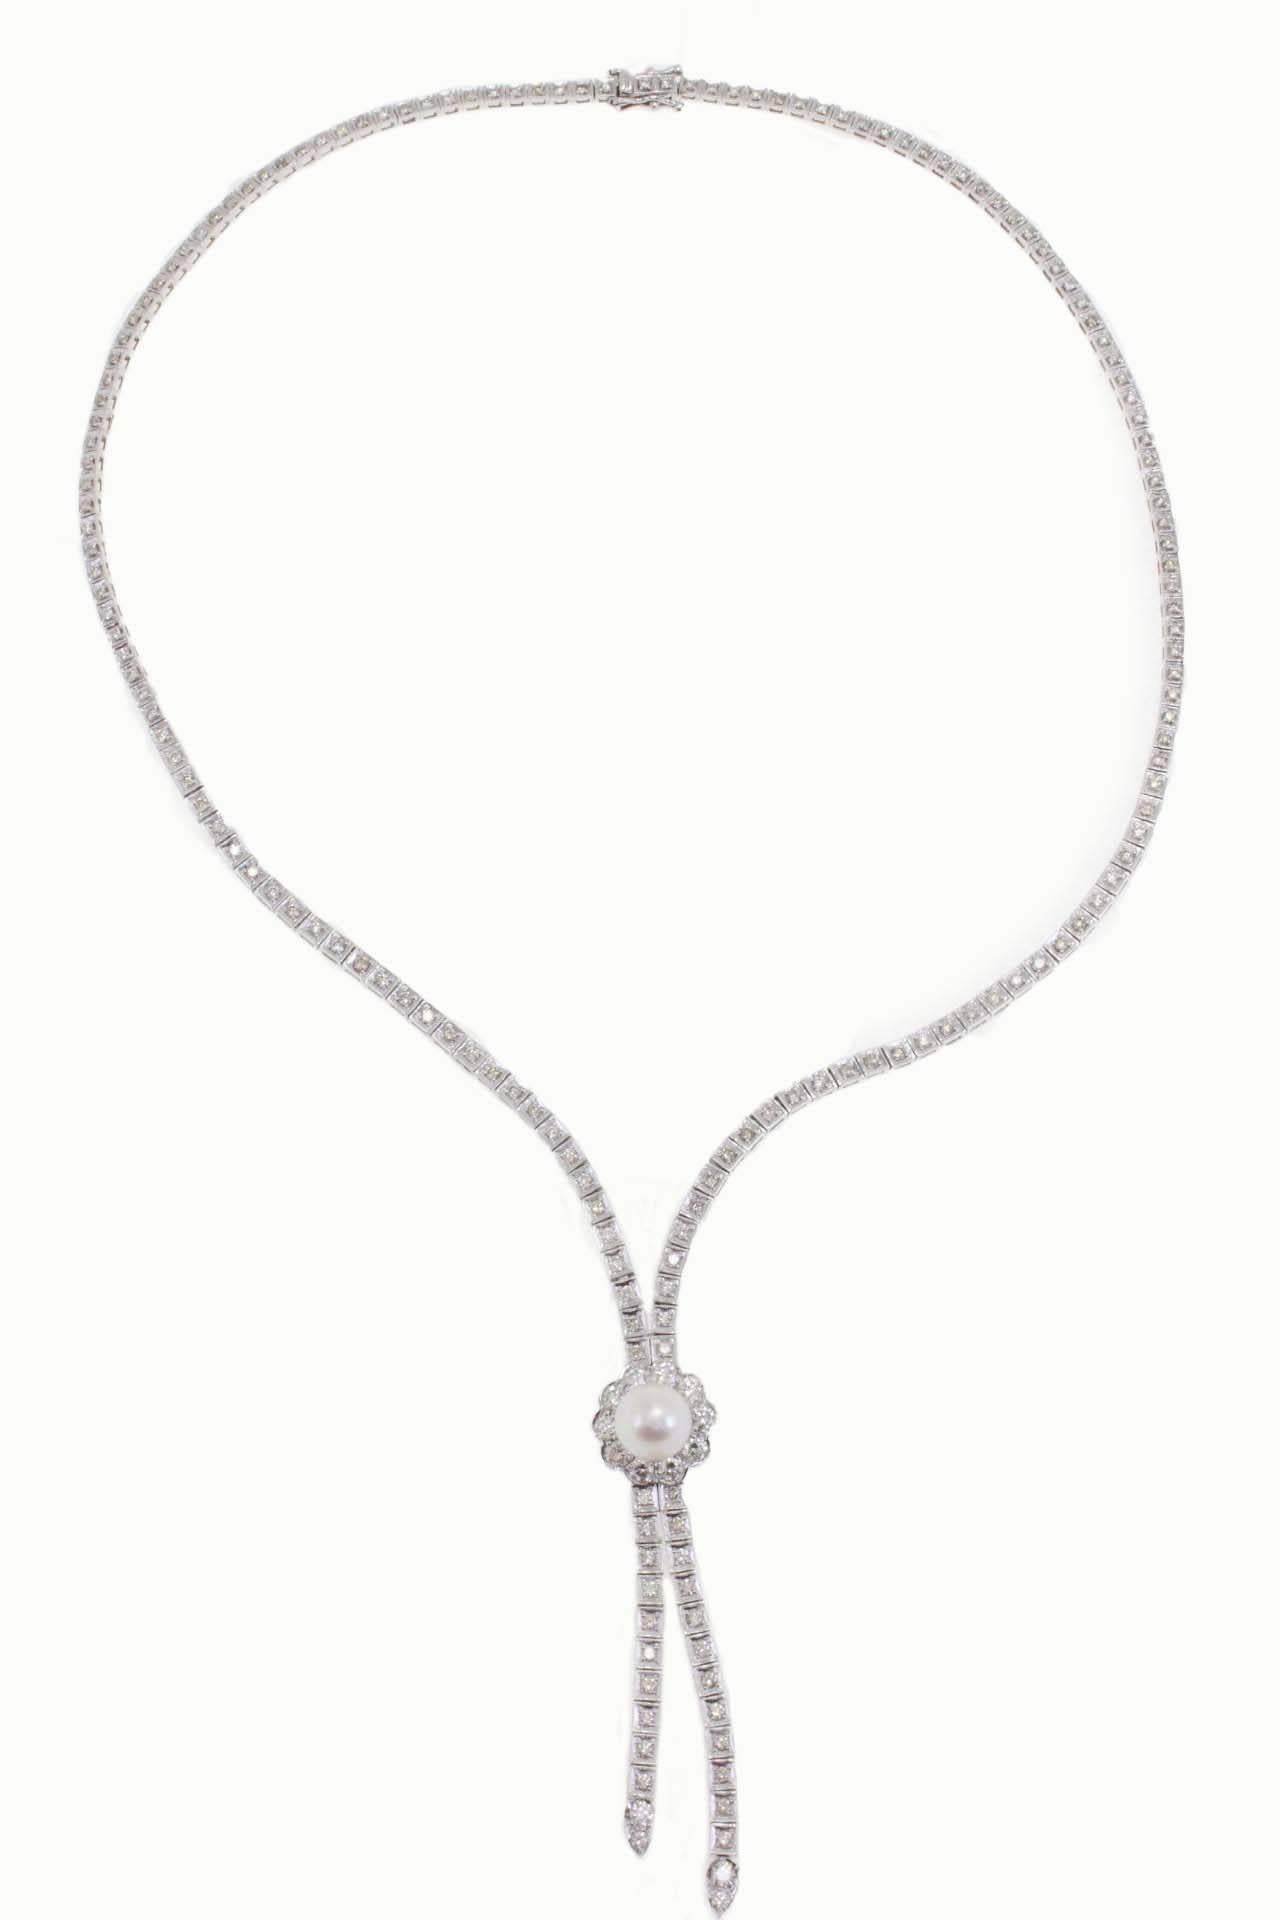 Elegant necklace in 14Kt white gold composed of a single row of diamonds with a pearl in the middle.

diamonds(5.02Kt)
pearl (1.06 g) of 8mm 
tot weight 24.30gr
rf.896402